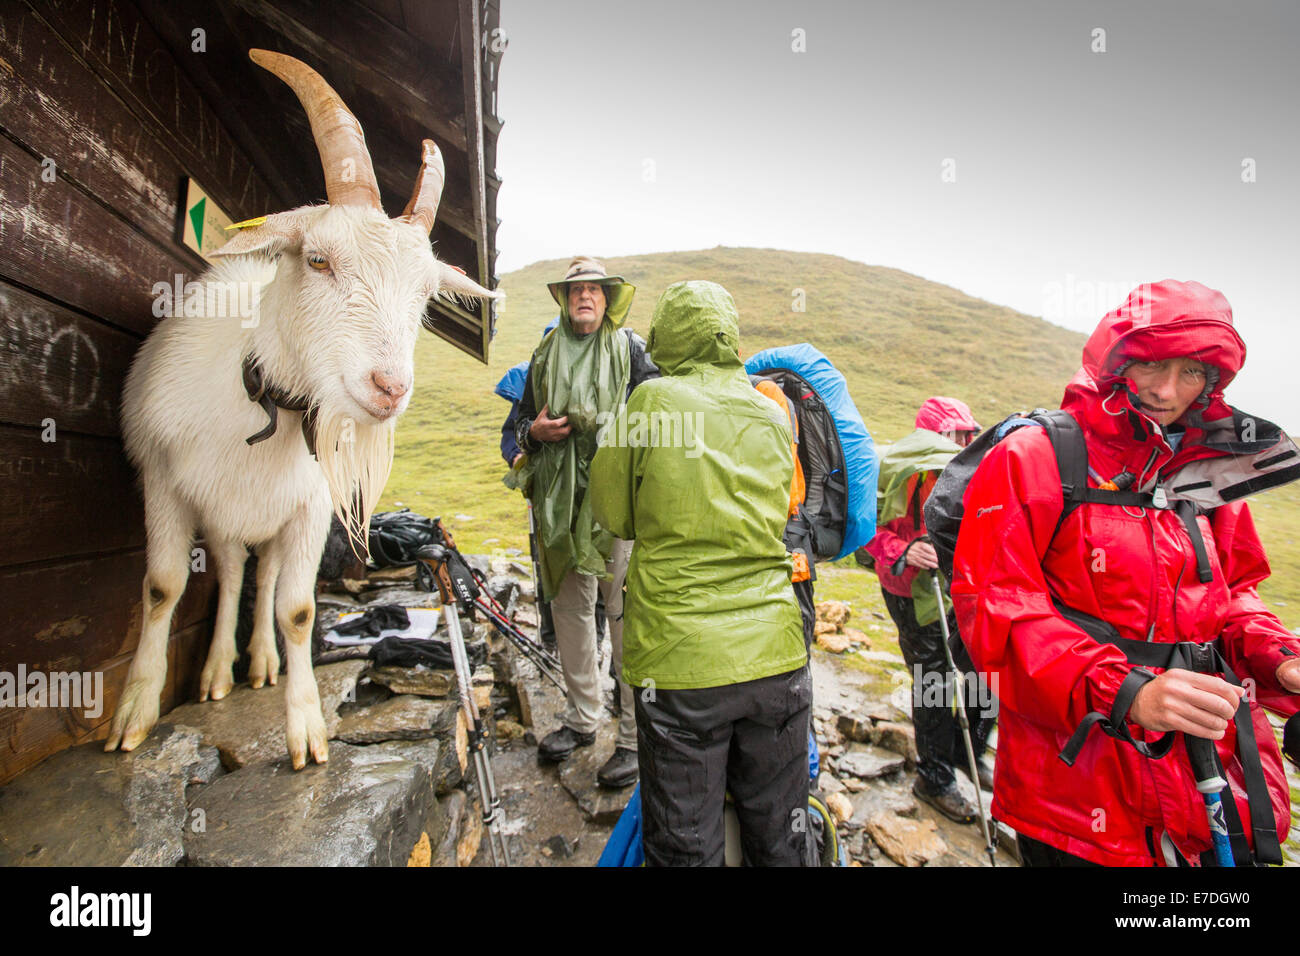 Walkers on the Tour Du Mont Blanc share shelter from heavy rain with a goat on the Col Du Bonhomme near Les Contamines, French Alps. Stock Photo